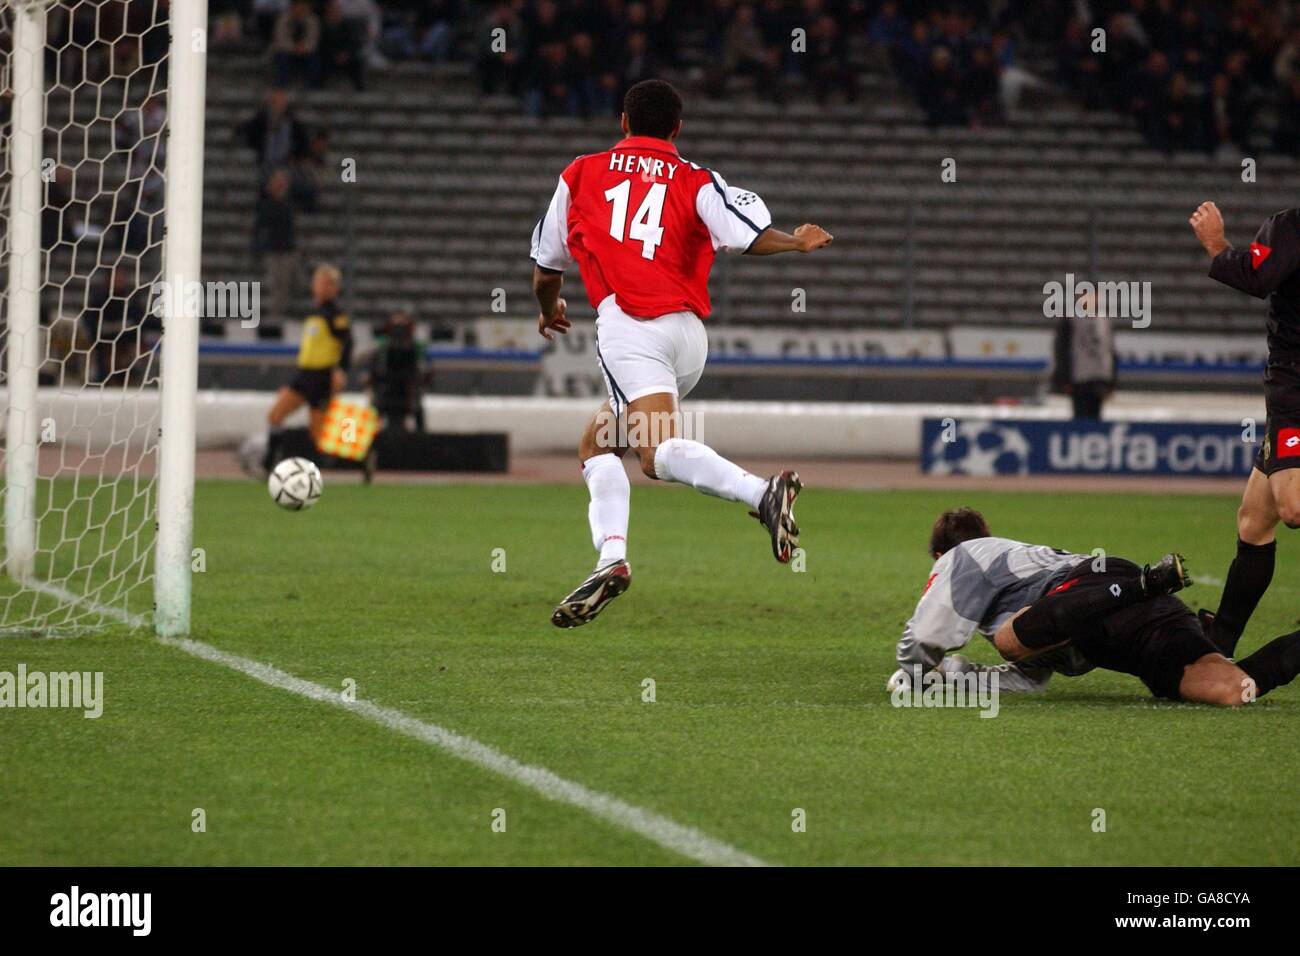 Thierry Henry the Arsenal striker puts the ball wide after getting past Juventus goalkeeper Fabian Carini Stock Photo